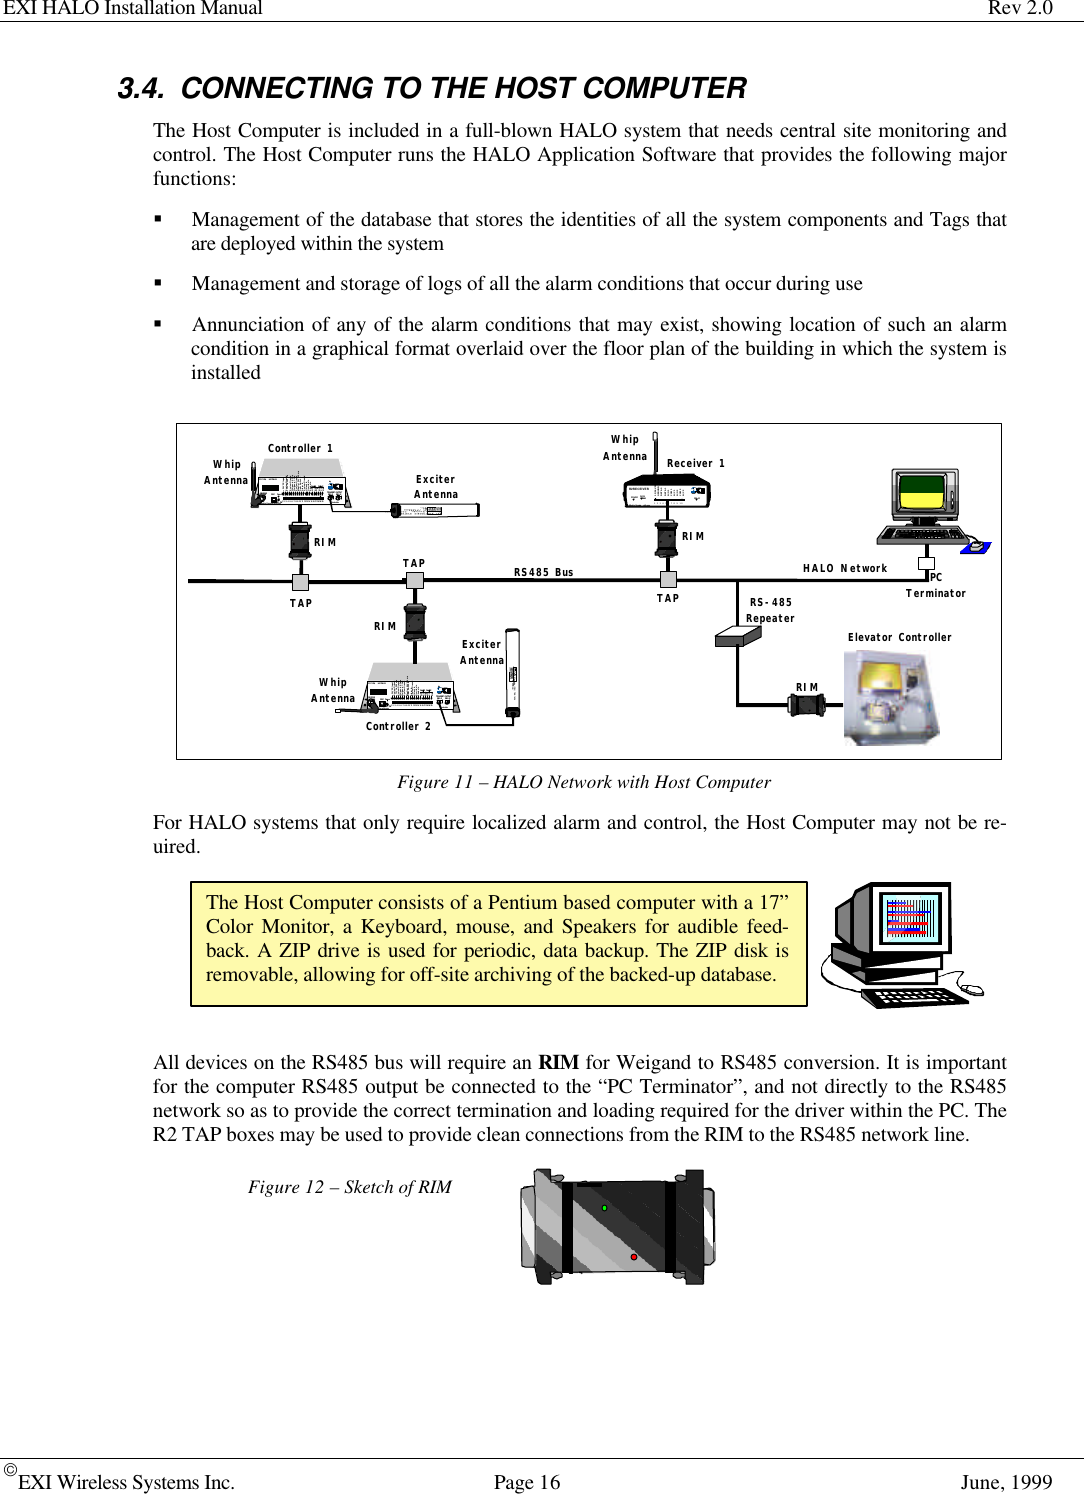 EXI HALO Installation Manual Rev 2.0EXI Wireless Systems Inc. Page 16 June, 19993.4. CONNECTING TO THE HOST COMPUTERThe Host Computer is included in a full-blown HALO system that needs central site monitoring andcontrol. The Host Computer runs the HALO Application Software that provides the following majorfunctions:§ Management of the database that stores the identities of all the system components and Tags thatare deployed within the system§ Management and storage of logs of all the alarm conditions that occur during use§ Annunciation of any of the alarm conditions that may exist, showing location of such an alarmcondition in a graphical format overlaid over the floor plan of the building in which the system isinstalledFigure 11 – HALO Network with Host ComputerFor HALO systems that only require localized alarm and control, the Host Computer may not be re-uired.All devices on the RS485 bus will require an RIM for Weigand to RS485 conversion. It is importantfor the computer RS485 output be connected to the “PC Terminator”, and not directly to the RS485network so as to provide the correct termination and loading required for the driver within the PC. TheR2 TAP boxes may be used to provide clean connections from the RIM to the RS485 network line.Figure 12 – Sketch of RIMThe Host Computer consists of a Pentium based computer with a 17”Color Monitor, a Keyboard, mouse, and Speakers for audible feed-back. A ZIP drive is used for periodic, data backup. The ZIP disk isremovable, allowing for off-site archiving of the backed-up database.R2 RECEIVERDATACOMM.Made in Canada . .  with care12/24 VDCGROUNDDATA 0DATA 1N/O 1COM 1N/C 1N/O 2COM 2N/C 21   2   3   4   5   6   7   8   9    10POWER RELAYController 1WhipAntenna ExciterAntennaHALO NetworkRECEIVEANTENNA RBCFCC ID#          HE7MAXTRANSMIT  OUTPUTSEA #1 SEA #2Made in Canada . .  with care ControllerbyPower1    2     3     4     5     6     7     8    9    10    11    12   13   14   15   16   17   18   19   20+24V DC InputSystem Ground+12V Ou 200 maSystem GroundWeigand  0/DataWeigand  1/GndSystem GroundMagOut  24V 200 maDoor Switch InSystem GroundUnlock InOverride InStrobe InN.OCOMN.C.N.OCOMN.CRelay #1 Relay #2Alarm InOFF  ONEXI ELECTRONIC SYSTEMSWinnipeg, Manitoba  (204) 788-1696Made in CanadaPRODUCTMODEL NO.SERIAL NO&gt;ROAM  II/TAGRRRSEA-M1118Controller 2WhipAntennaExciterAntennaRECEIVEANTENNA RBCFCC ID#          HE7MAXTRANSMIT  OUTPUTSEA #1 SEA #2Made in Canada . .  with care ControllerbyPower1    2     3     4     5     6     7     8    9    10    11    12   13   14   15   16   17   18   19   20+24V DC InputSystem Ground+12V Ou 200 maSystem GroundWeigand  0/DataWeigand  1/GndSystem GroundMagOut  24V 200 maDoor Switch InSystem GroundUnlock InOverride InStrobe InN.OCOMN.C.N.OCOMN.CRelay #1 Relay #2Alarm InOFF  ONWinnipeg, Manitoba  (204) 788-1696Made in CanadaPRODUCTMODEL NO.SERIAL NO&gt;ROAM  II/TAGRRRSEA-M1118RIMRIMReceiver 1WhipAntennaRIMRS485 BusTAPTAPTAPPCTerminatorRS-485RepeaterElevator ControllerRIM